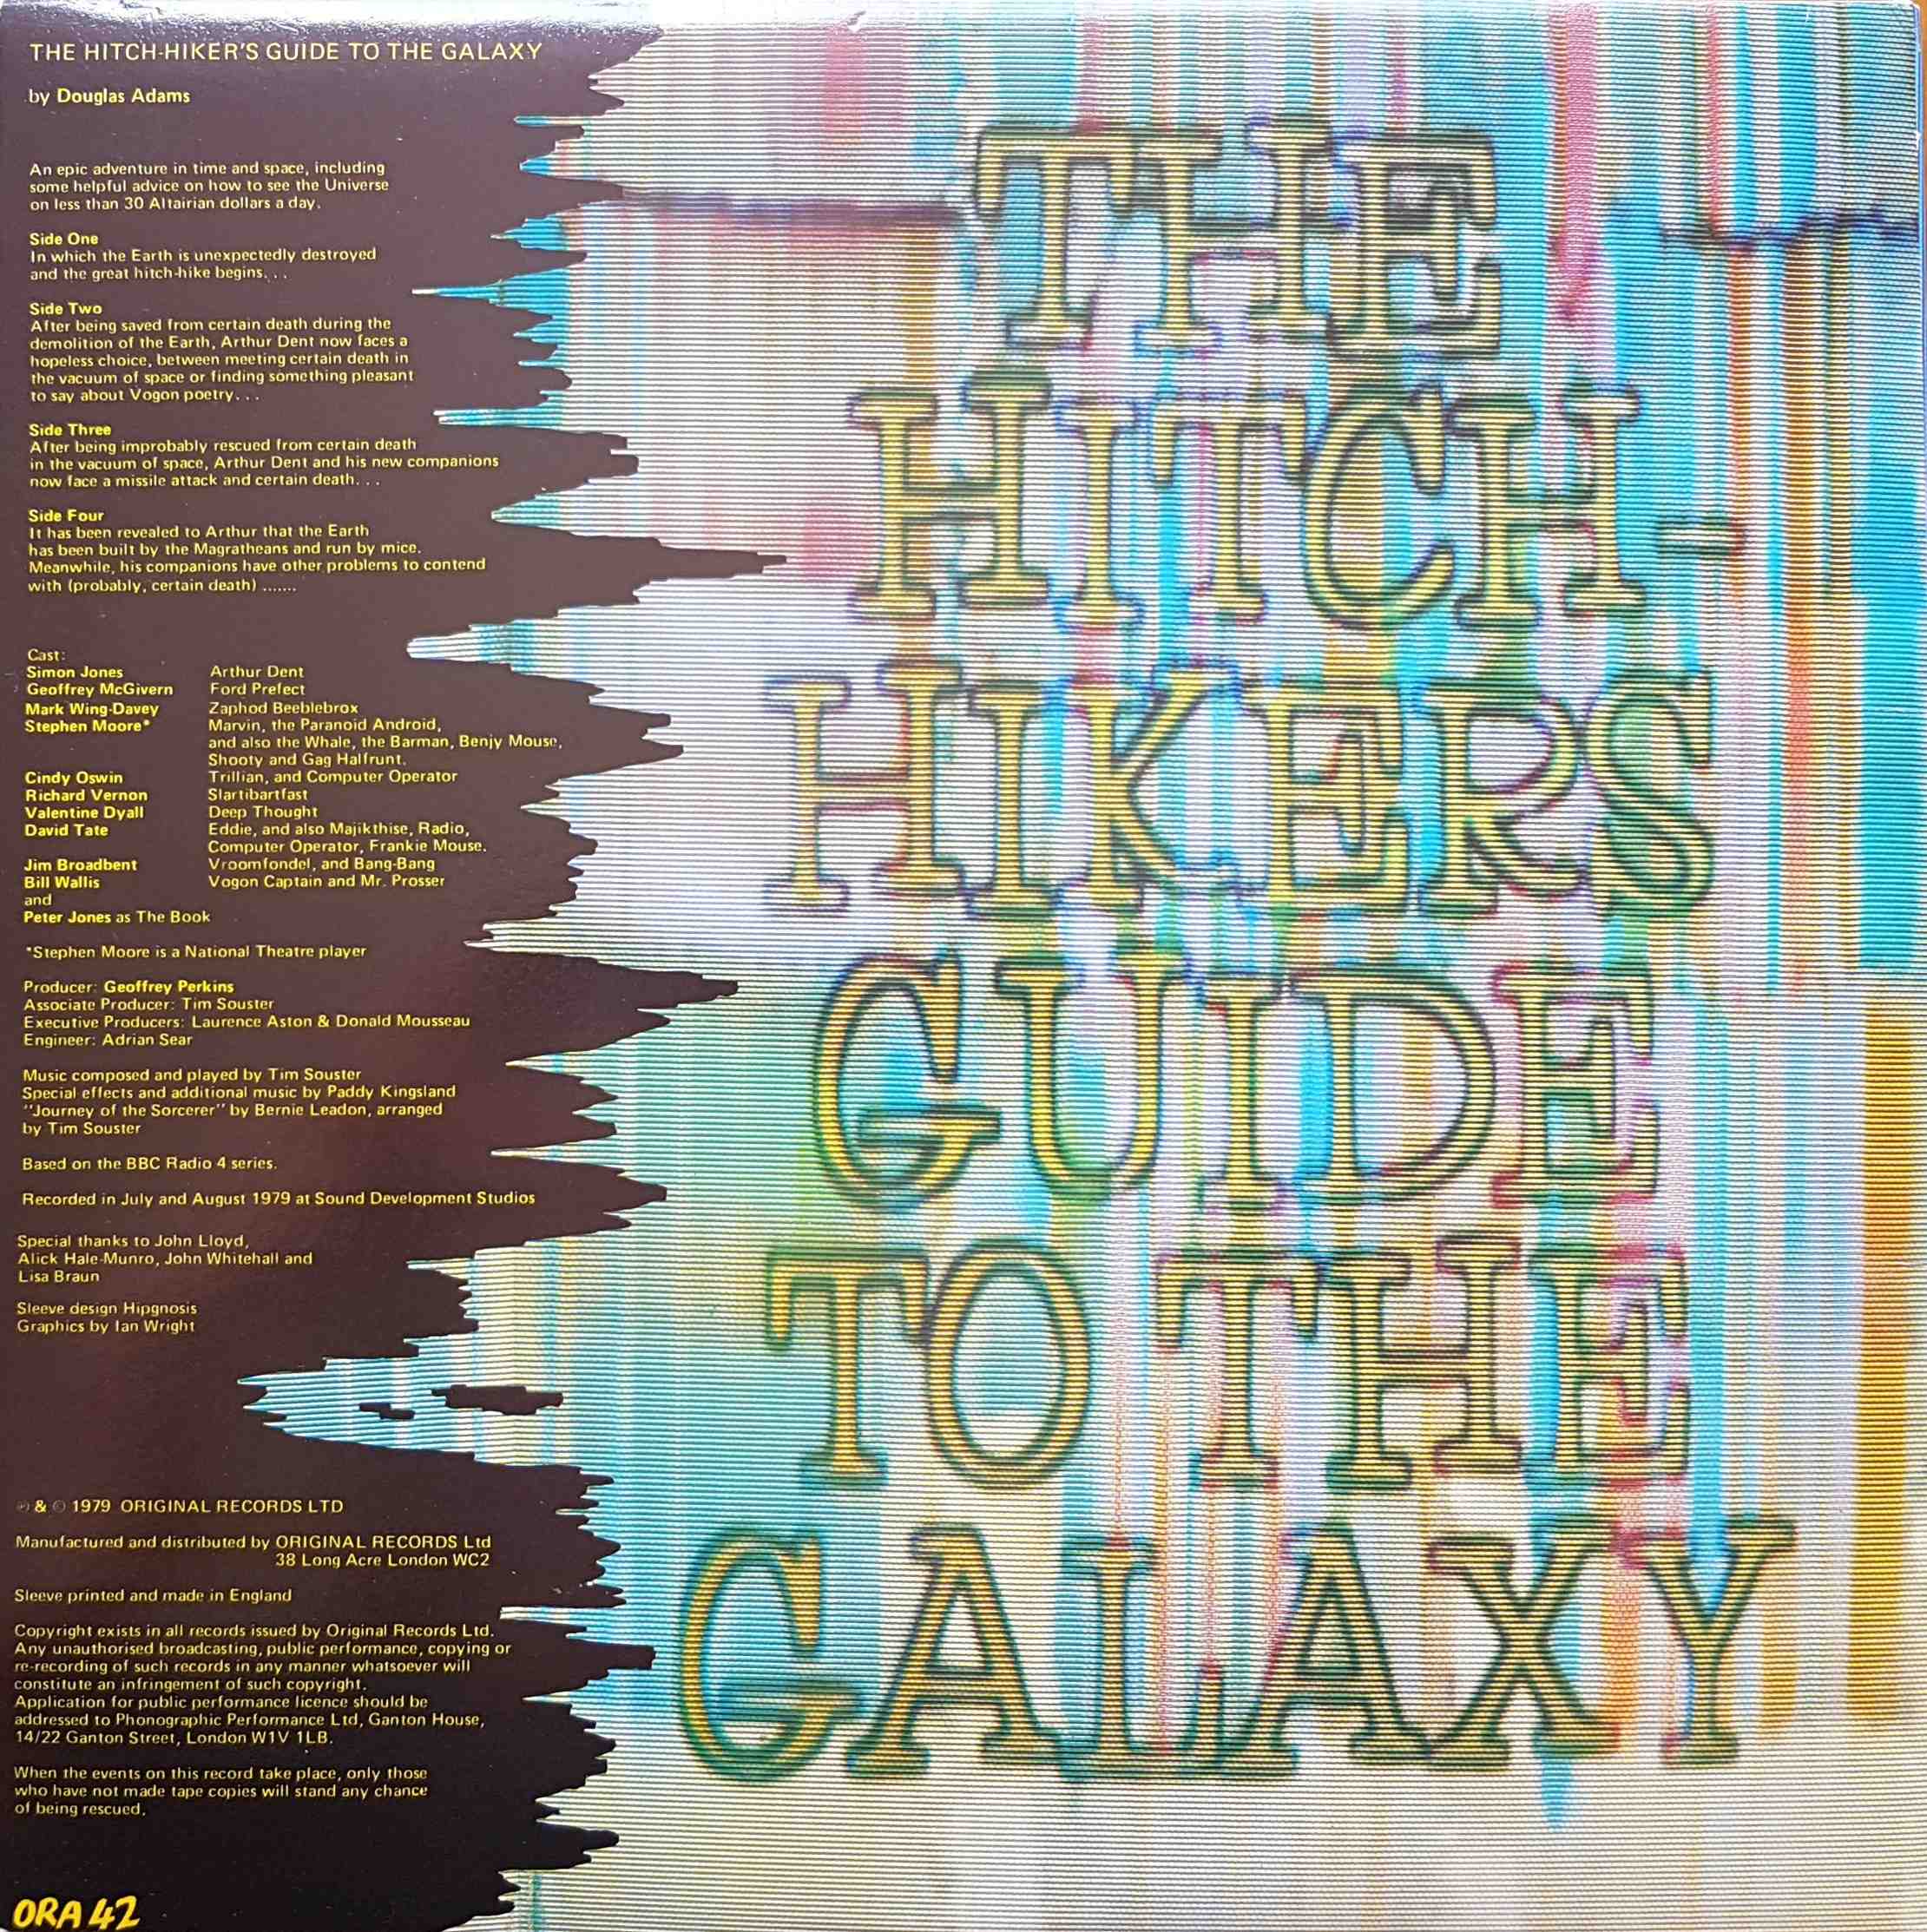 Picture of ORA 42 The hitchhiker's guide to the Galaxy by artist Douglas Adams from the BBC records and Tapes library